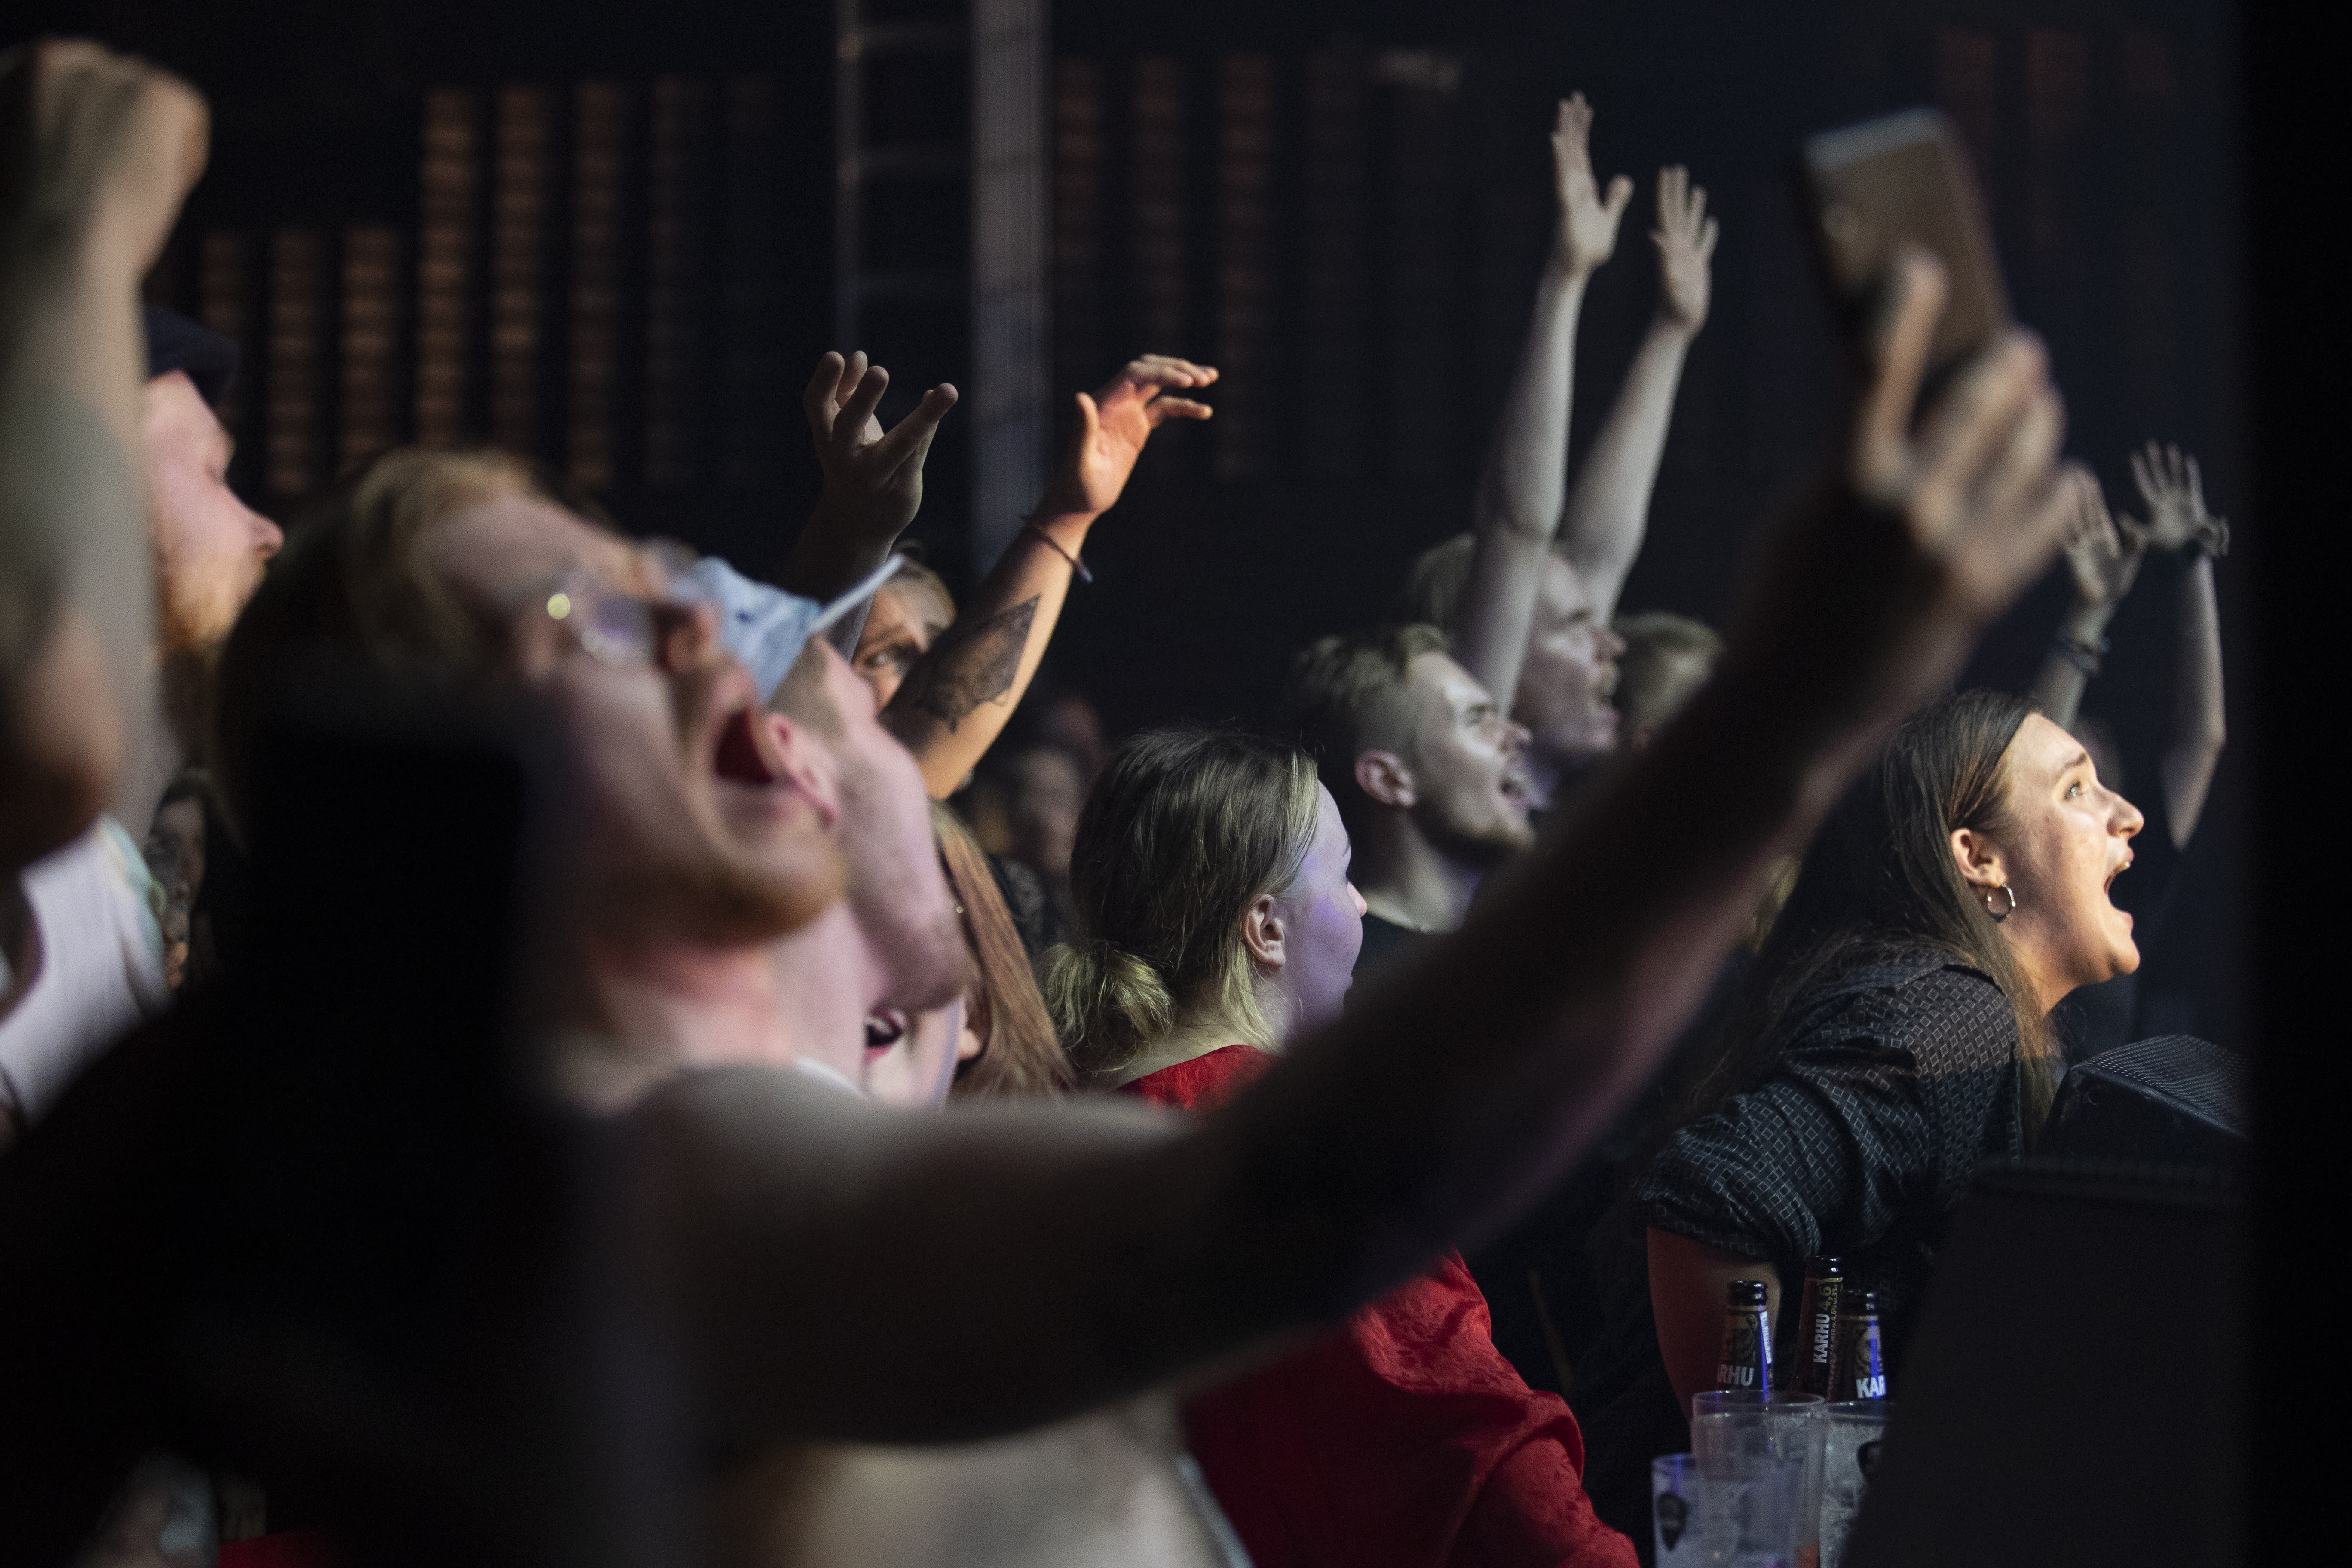 Uusimaa is restricting indoor gatherings as Covid cases increase